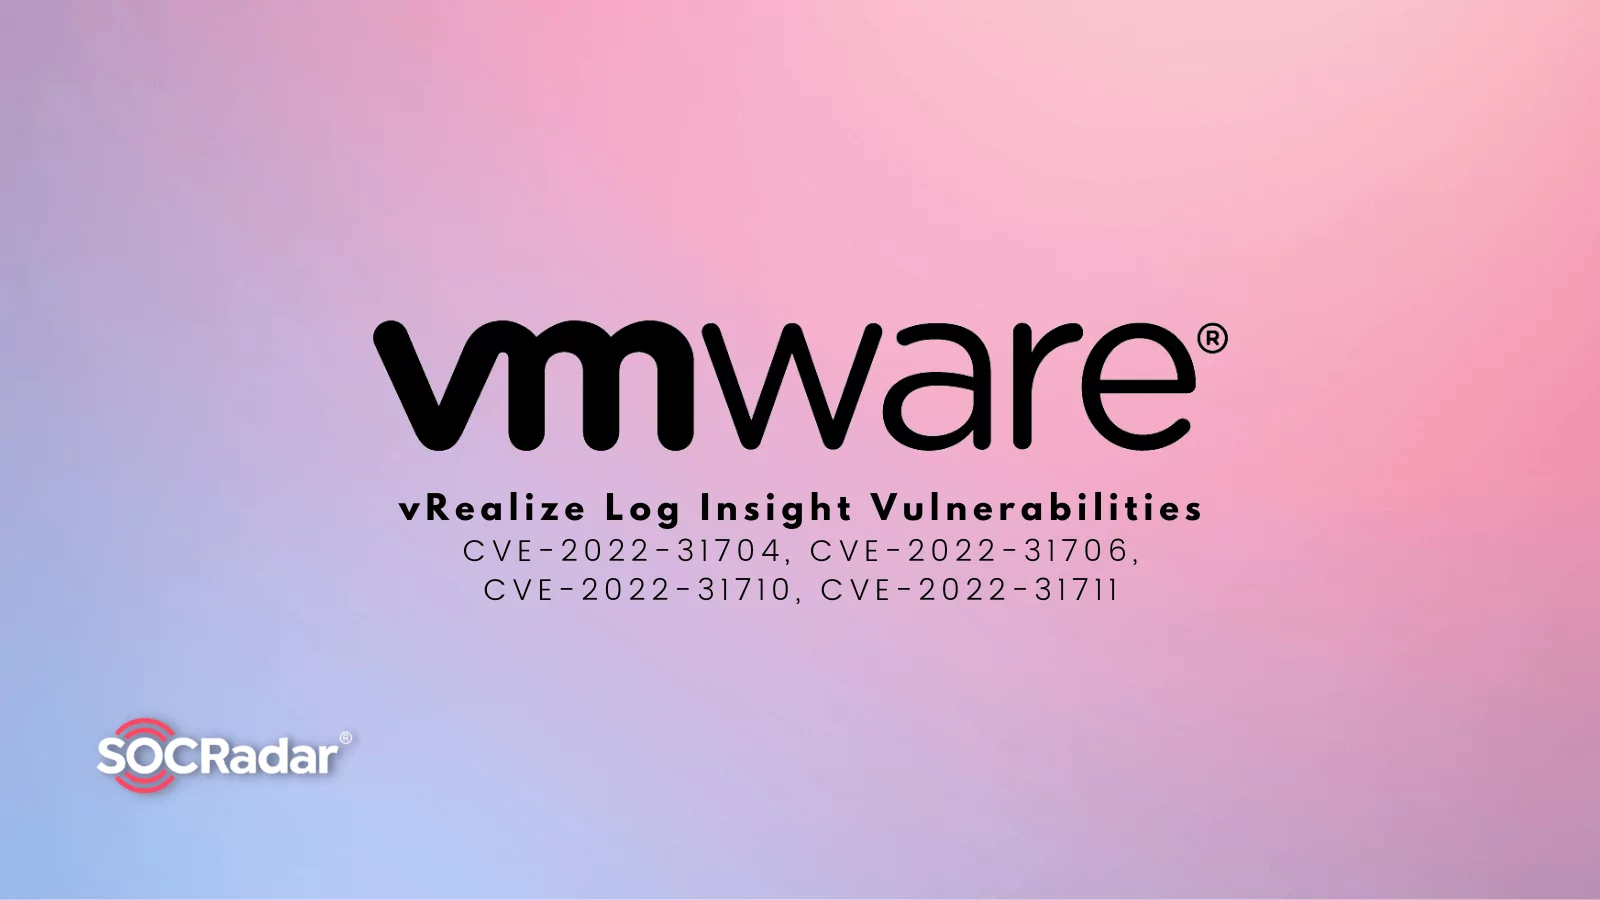 SOCRadar® Cyber Intelligence Inc. | VMware Patches Critical RCE Vulnerabilities in vRealize Log Insight